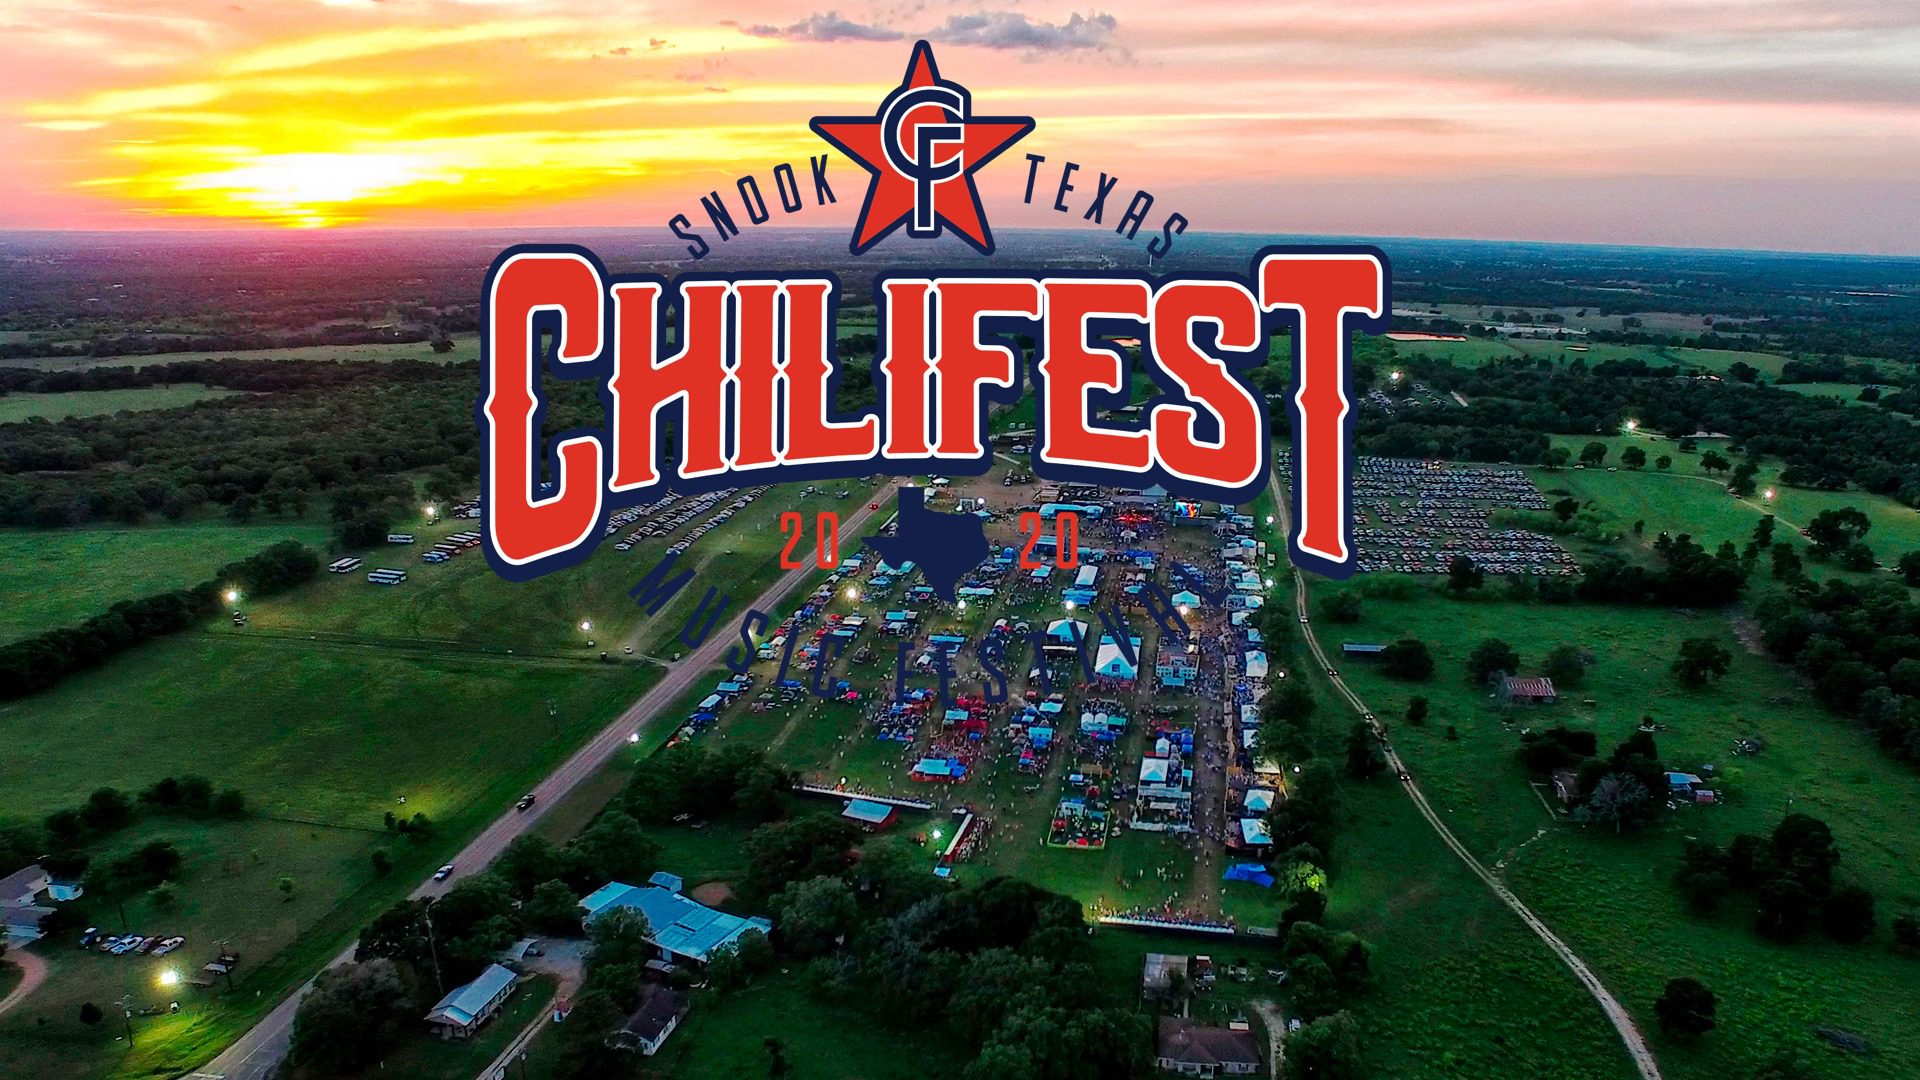 Chilifest 2020 Entertainment Lineup Unveil at Shiner Park at Northgate